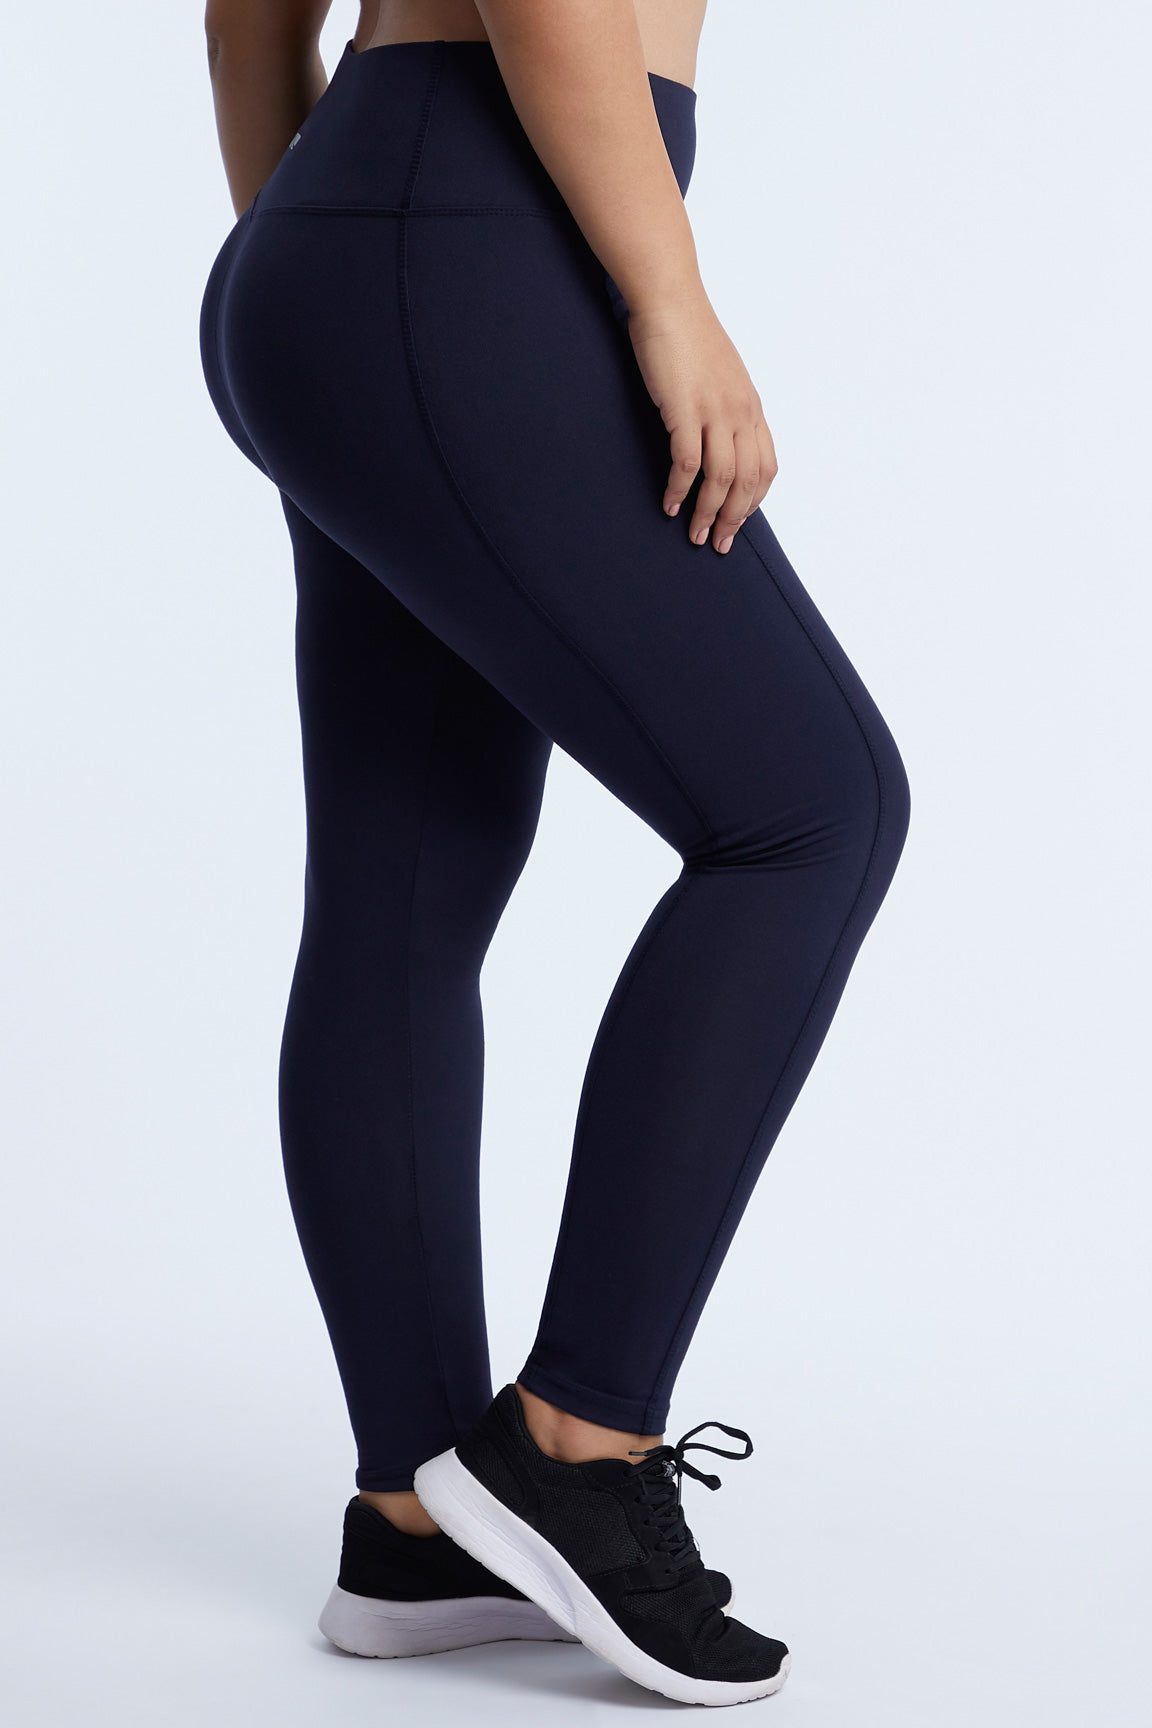 COMVALUE Workout Leggings for Women Plus Size,Womens Ribbed